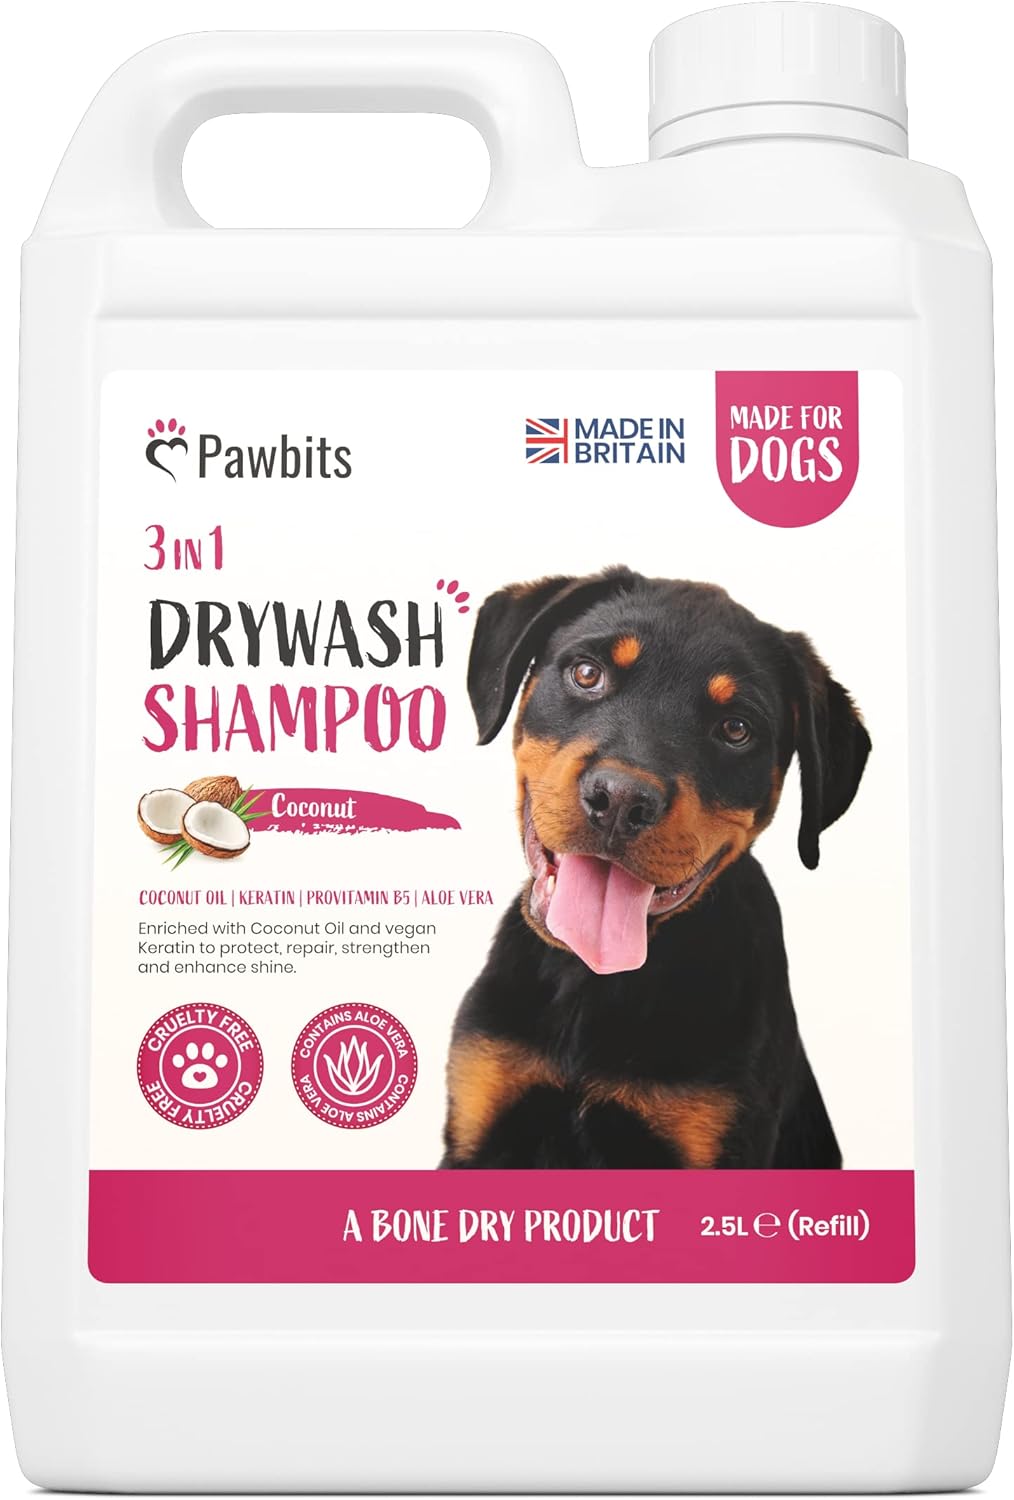 Pawbits Drywash Shampoo for Dogs - Puppy Friendly 3-in-1 Dry Shampoo to Clean, Condition & Detangle – No Water Required (Coconut - 2.5L)??PB-DRYWASH